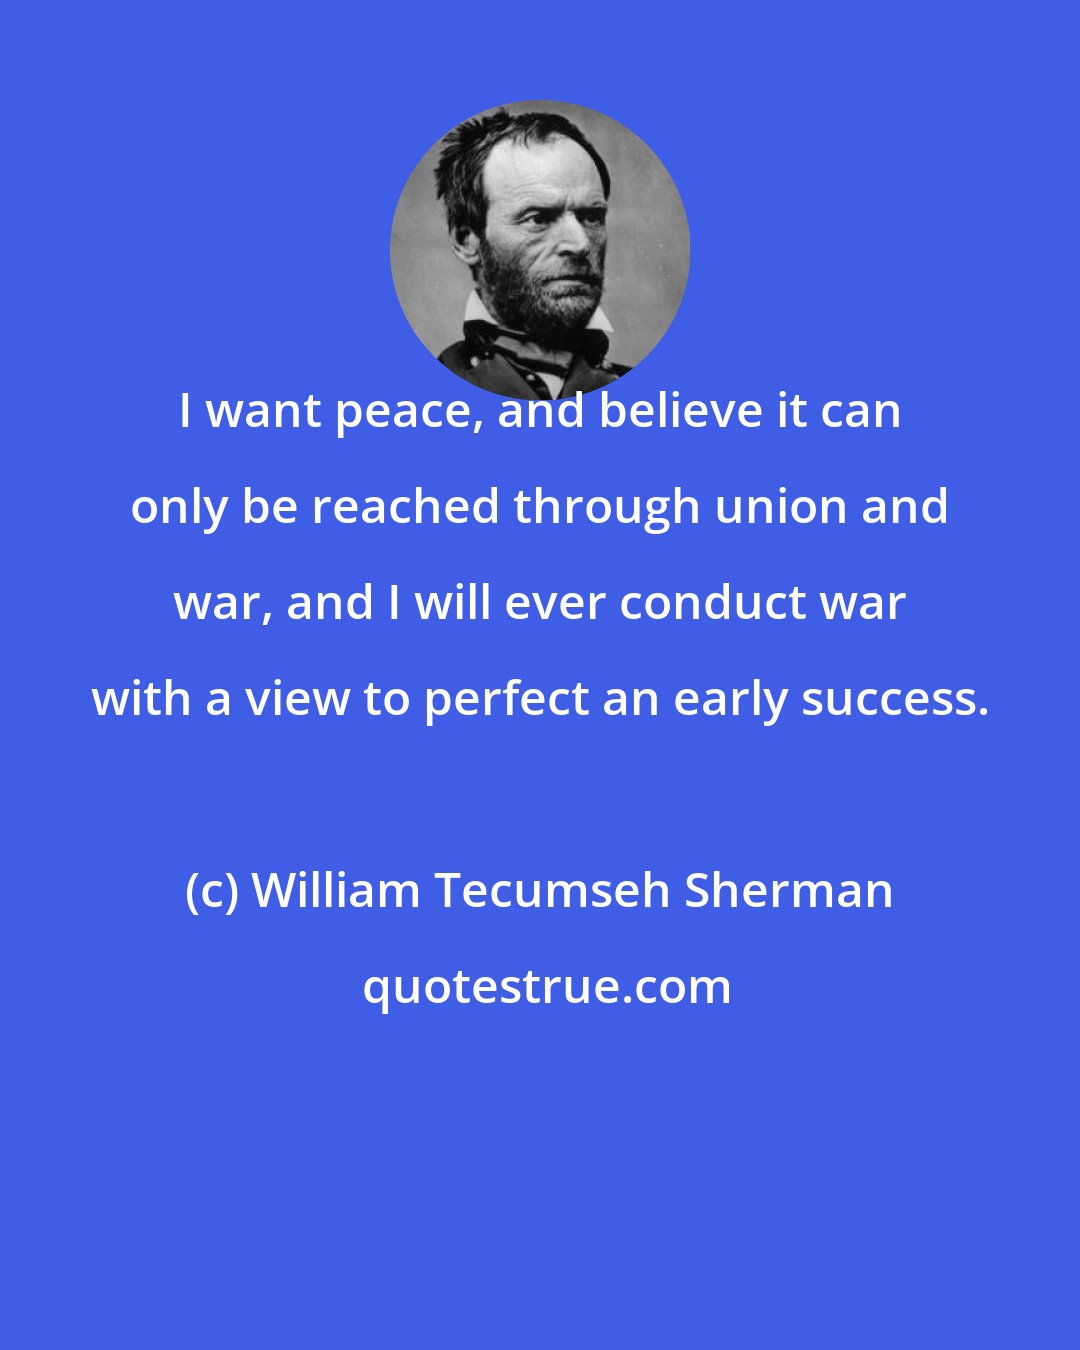 William Tecumseh Sherman: I want peace, and believe it can only be reached through union and war, and I will ever conduct war with a view to perfect an early success.